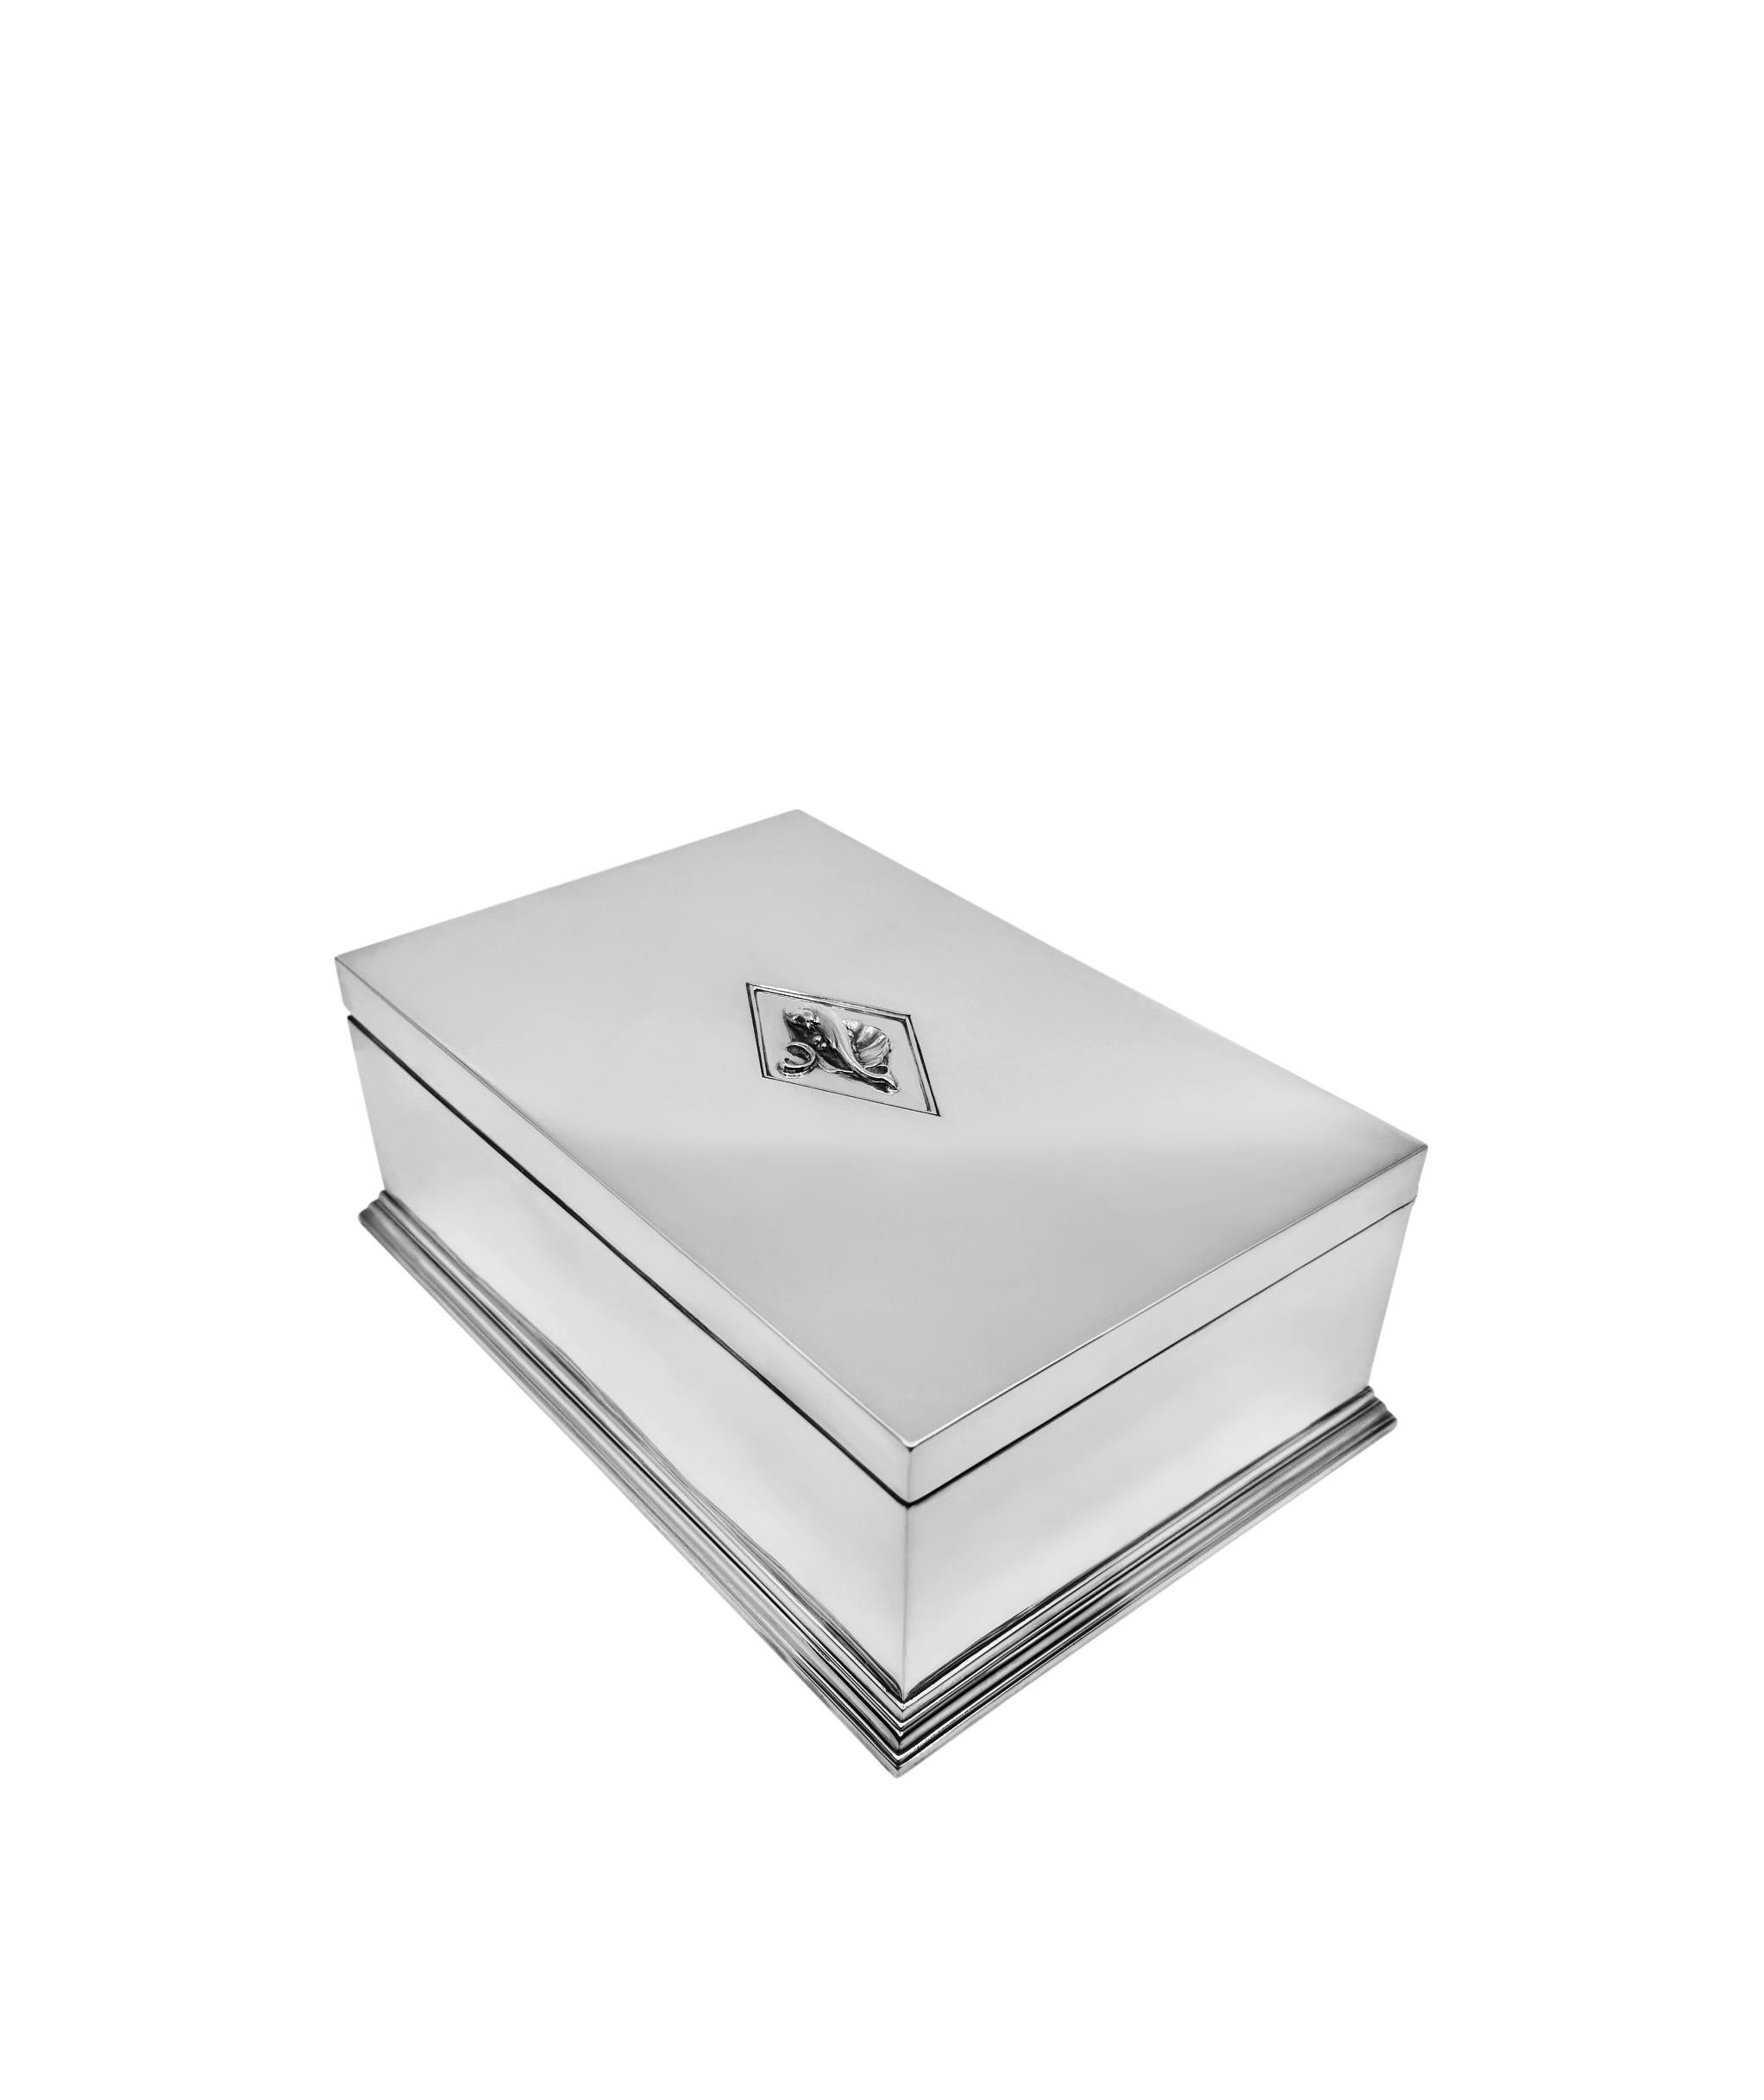 A Large early Georg Jensen sterling silver art deco box design #257 by Harald Nielsen in 1923. The box showcases exquisite craftsmanship. A generously sized hinged rectangular piece, it features a hand-hammered surface and subtle adornments like a